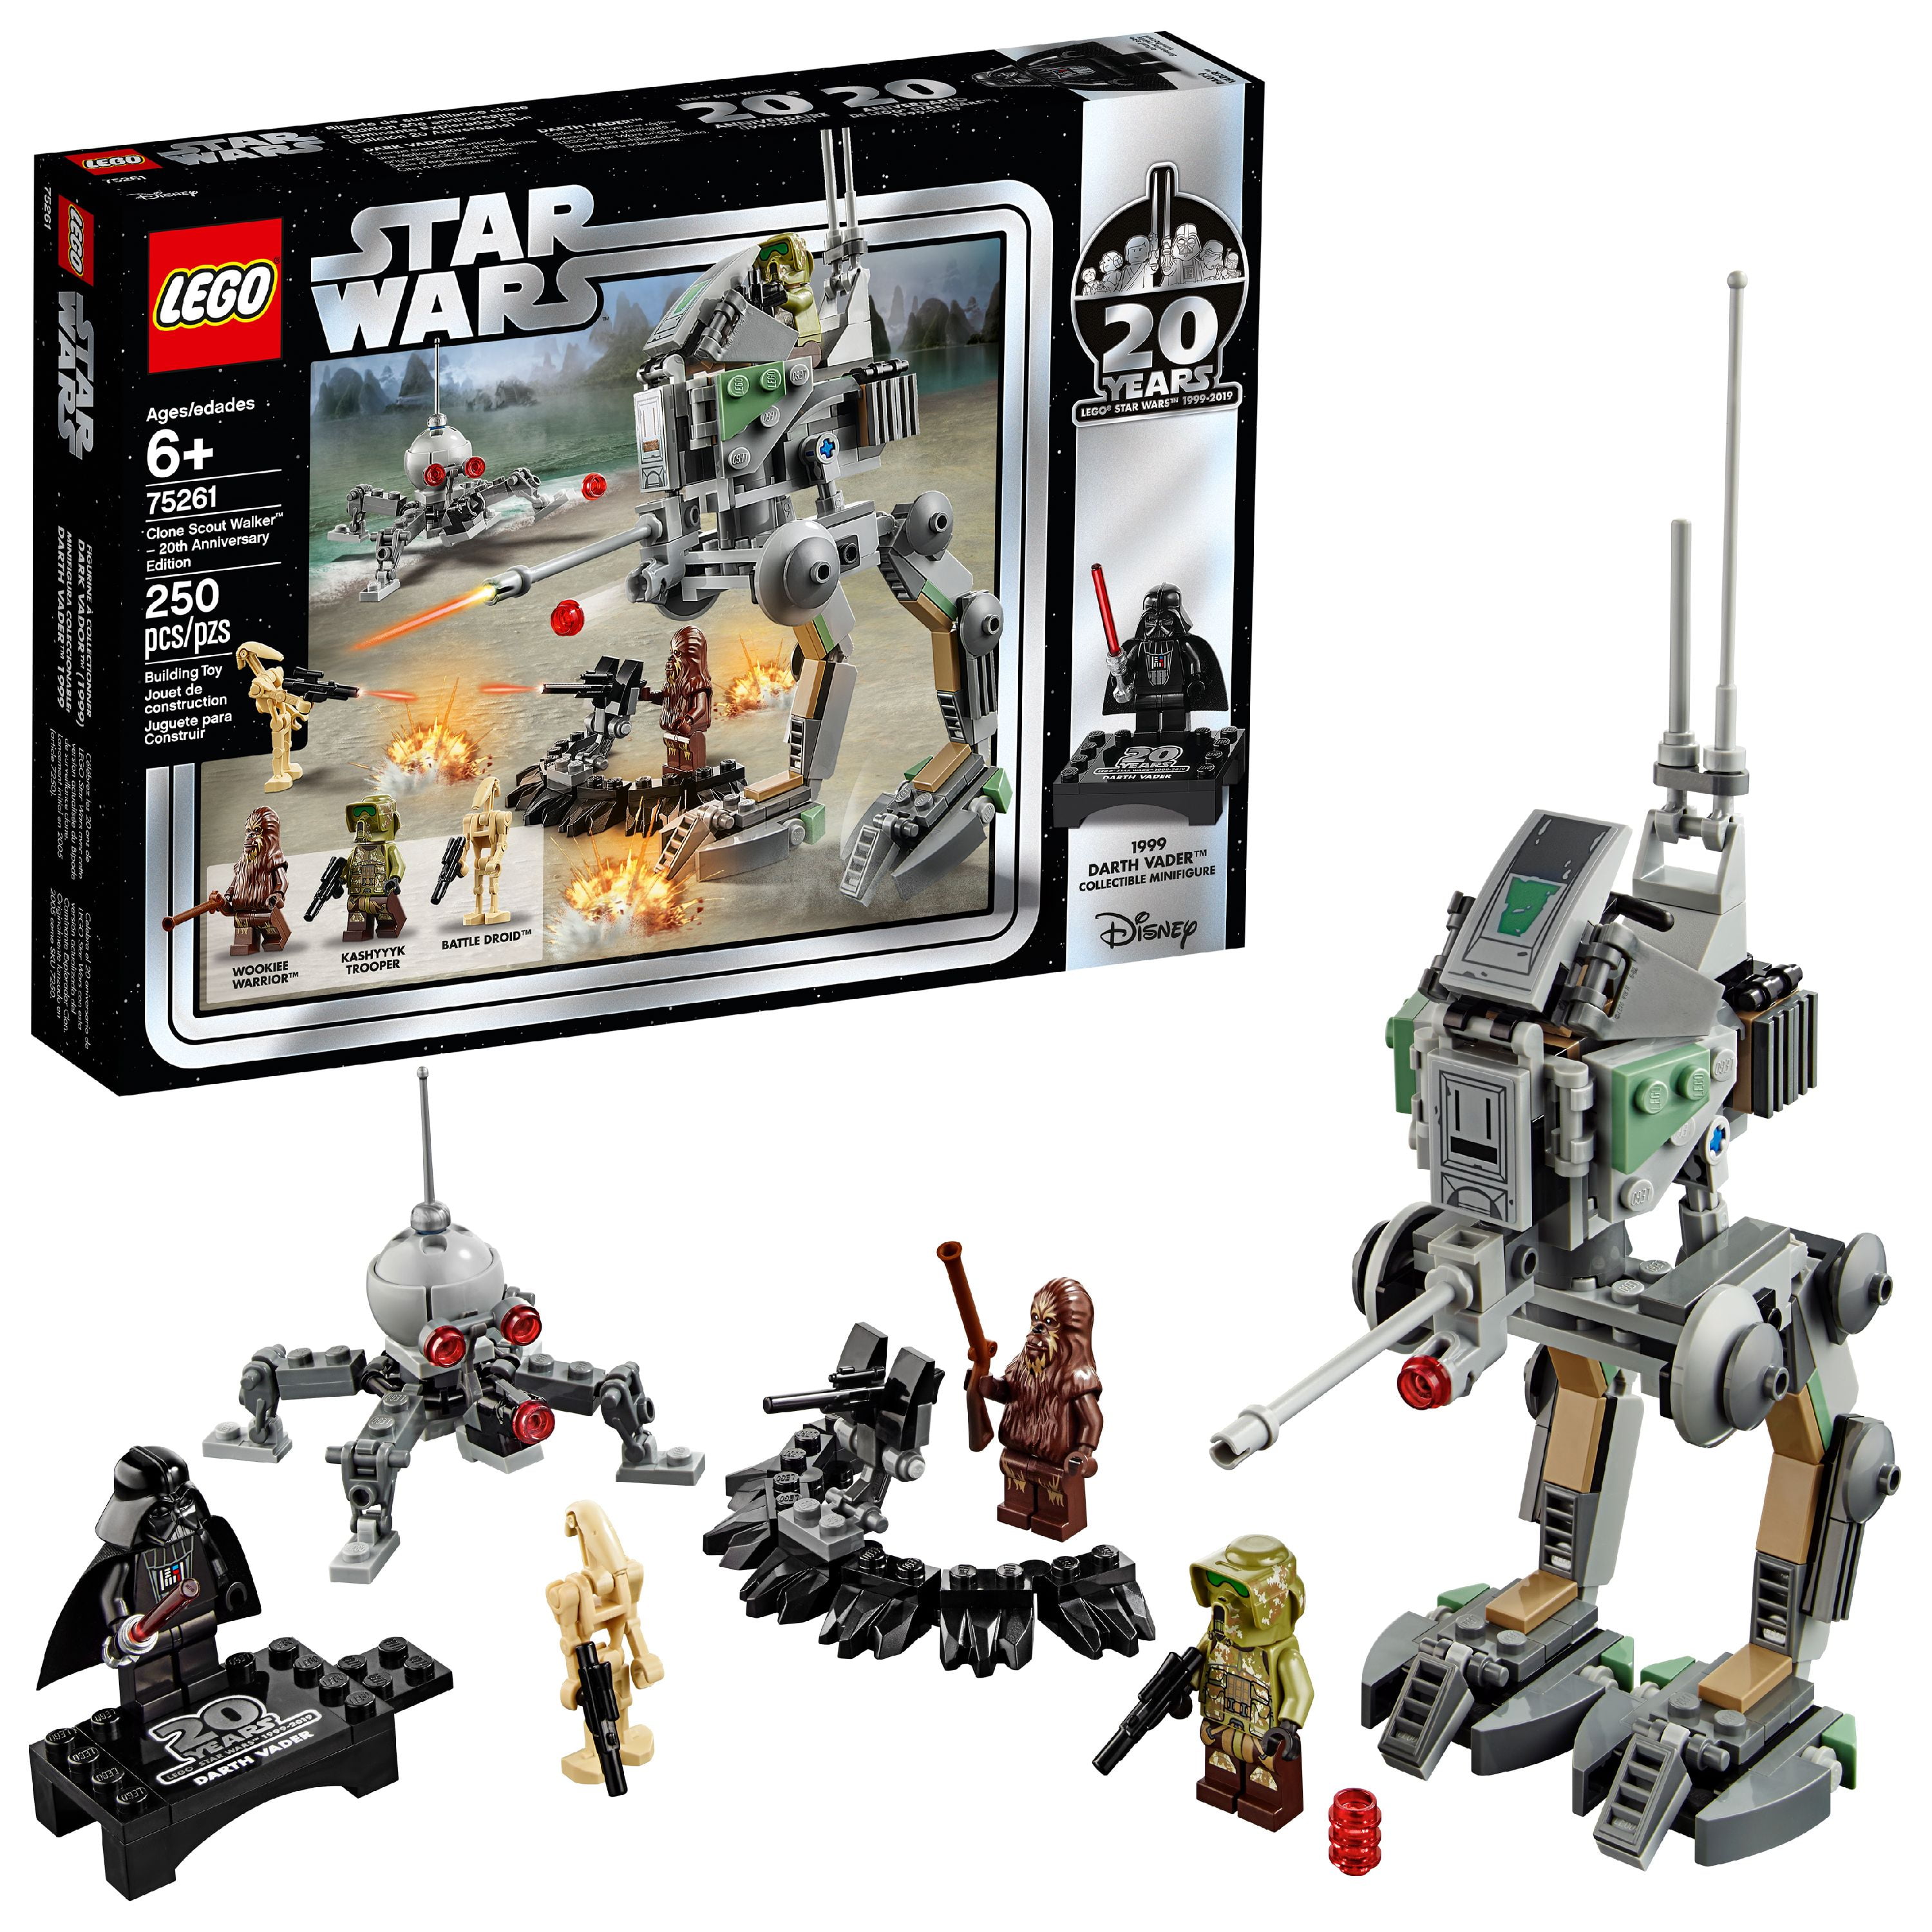 Lego Star Wars Clone Scout Walker 20th Anniversary Edition for sale online 75261 